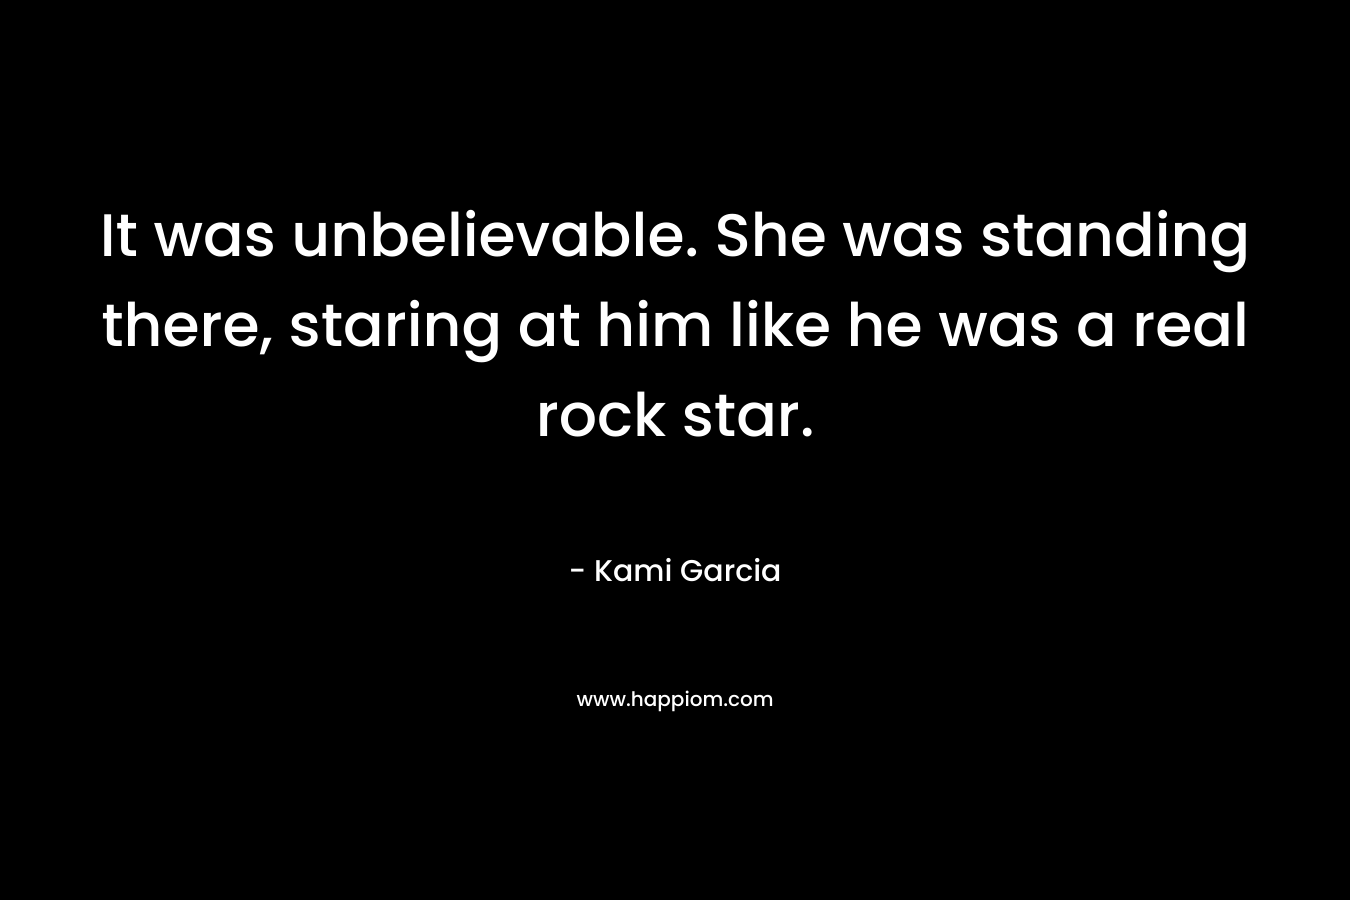 It was unbelievable. She was standing there, staring at him like he was a real rock star.